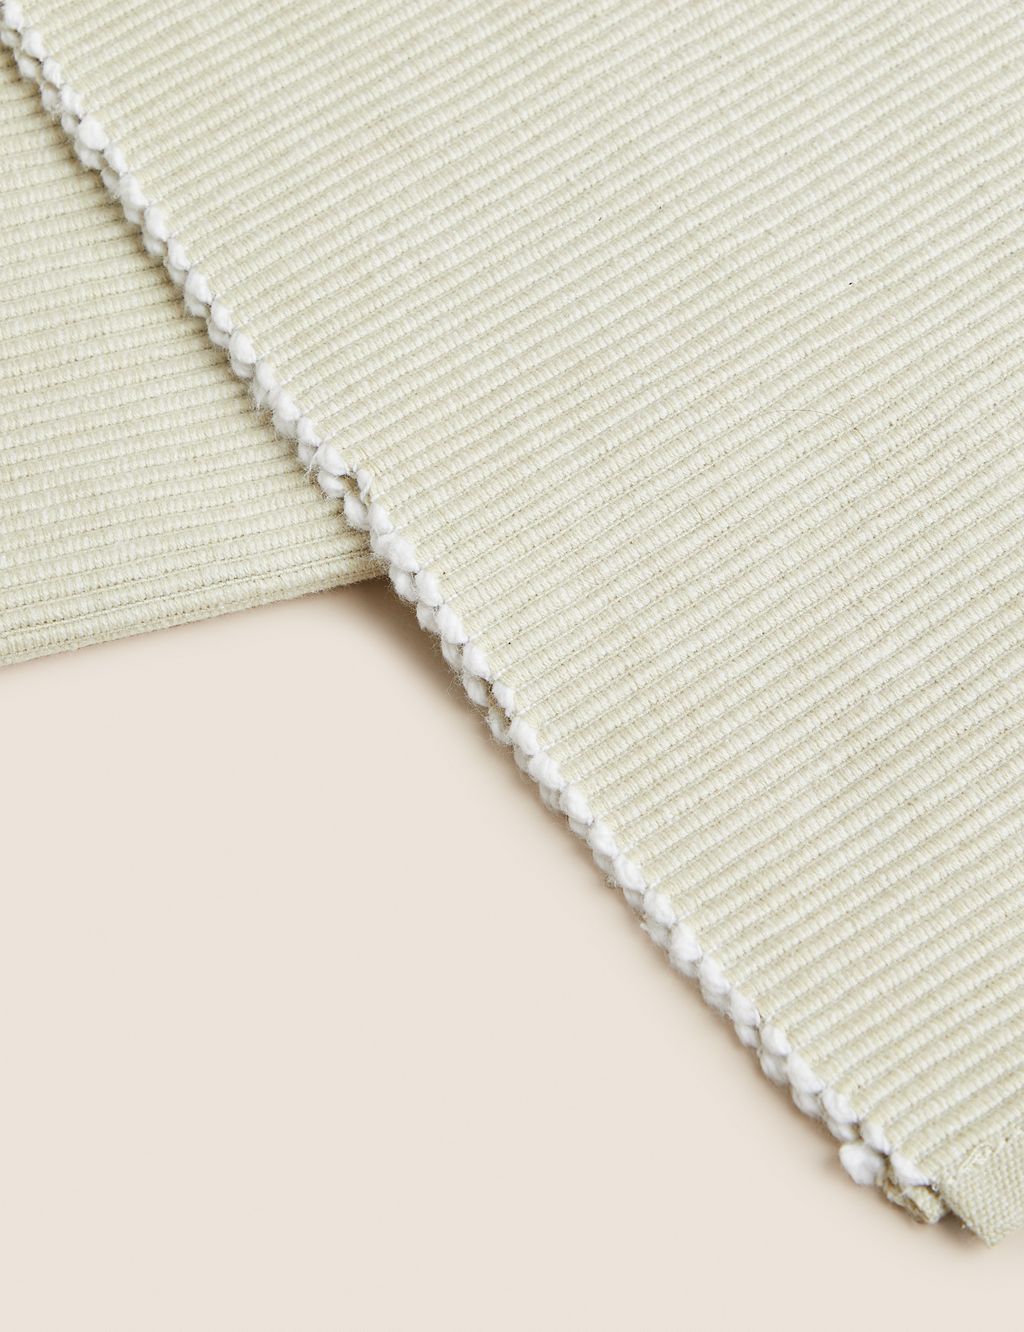 Cotton Rich Ribbed Table Runner 1 of 3